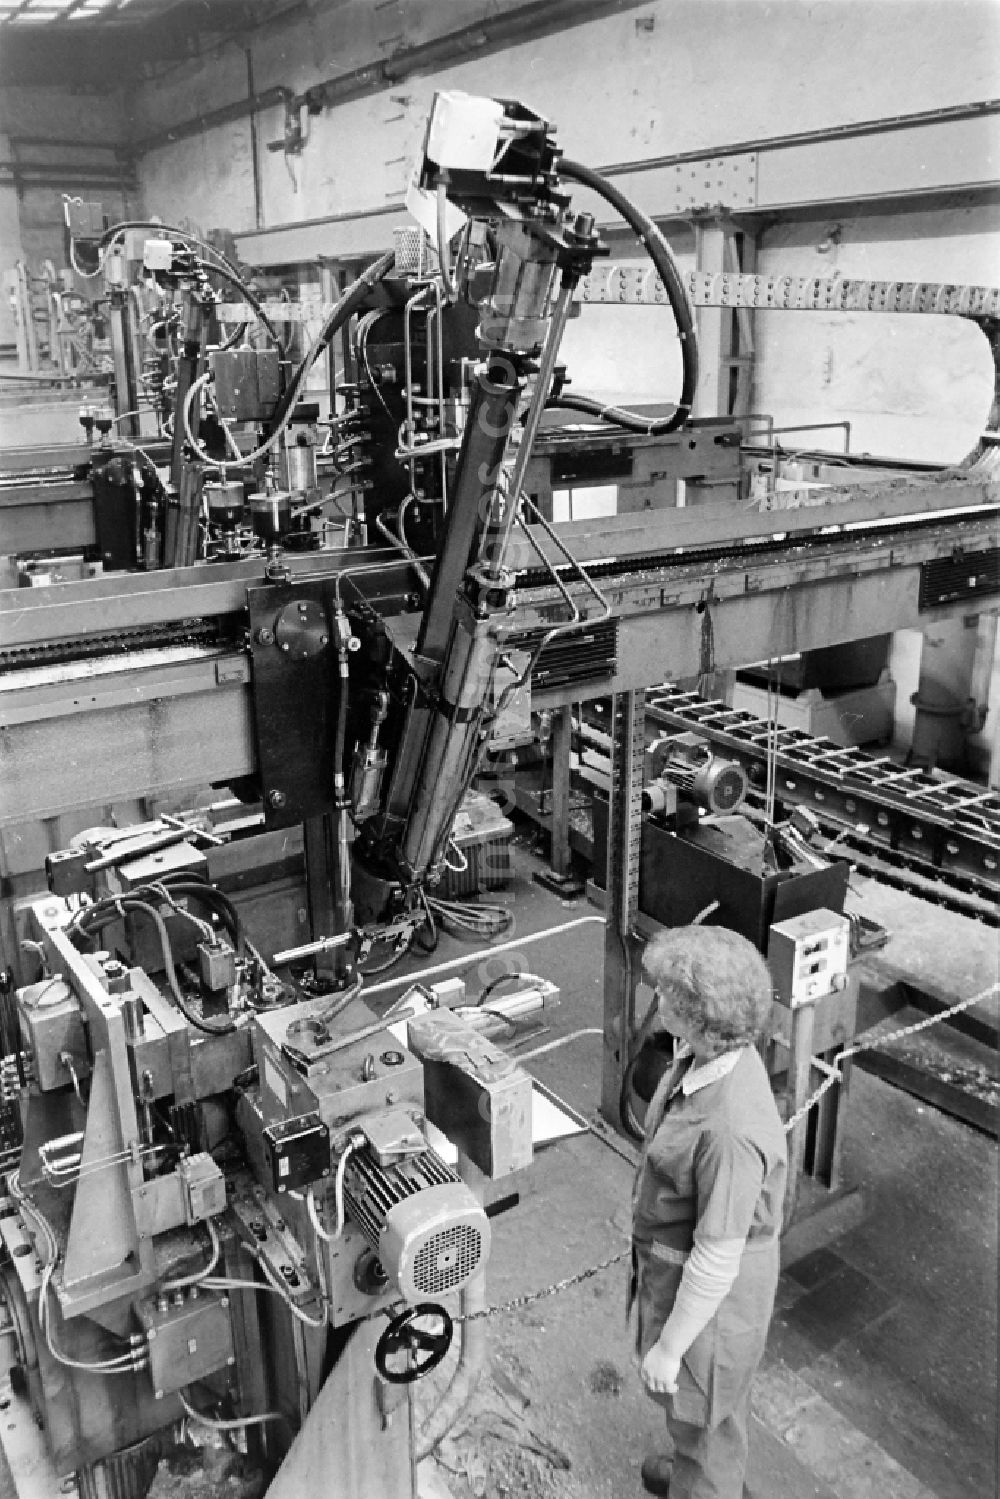 GDR image archive: Magdeburg - Production process for the manufacture of machine parts in a youth research collective in the SKET heavy machine construction combine Ernst Thaelmann in Magdeburg in the state of Saxony-Anhalt in the area of the former GDR, German Democratic Republic